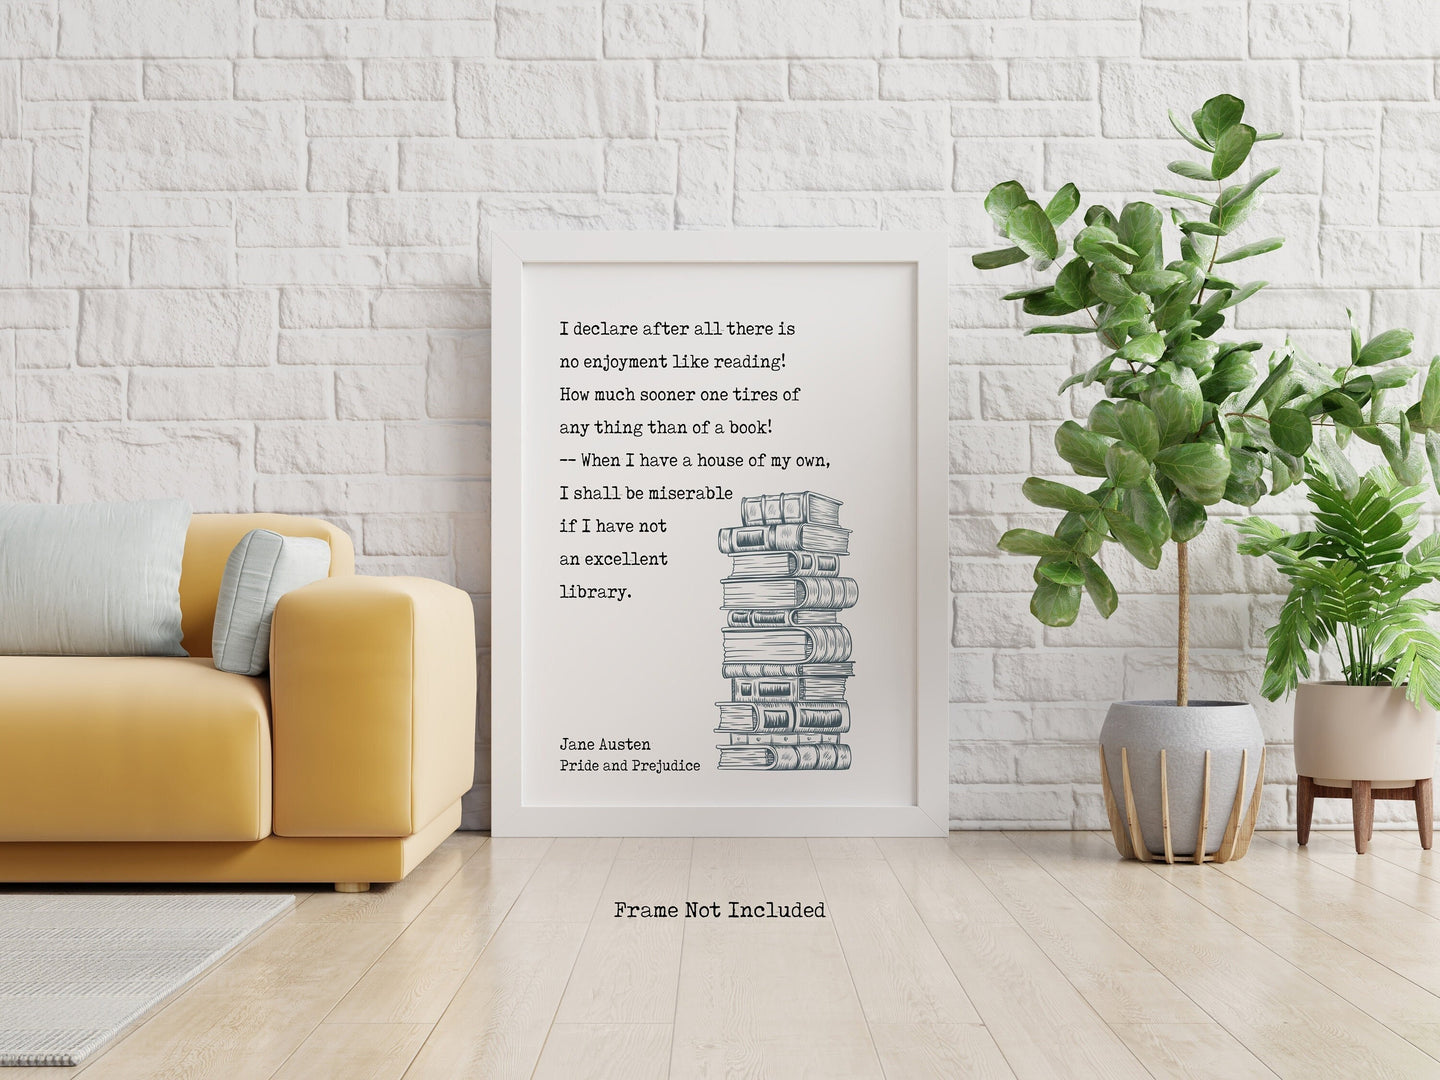 Jane Austen Reading Quote from Pride and Prejudice - I declare after all there is no enjoyment like reading! - Reading Nook Decor